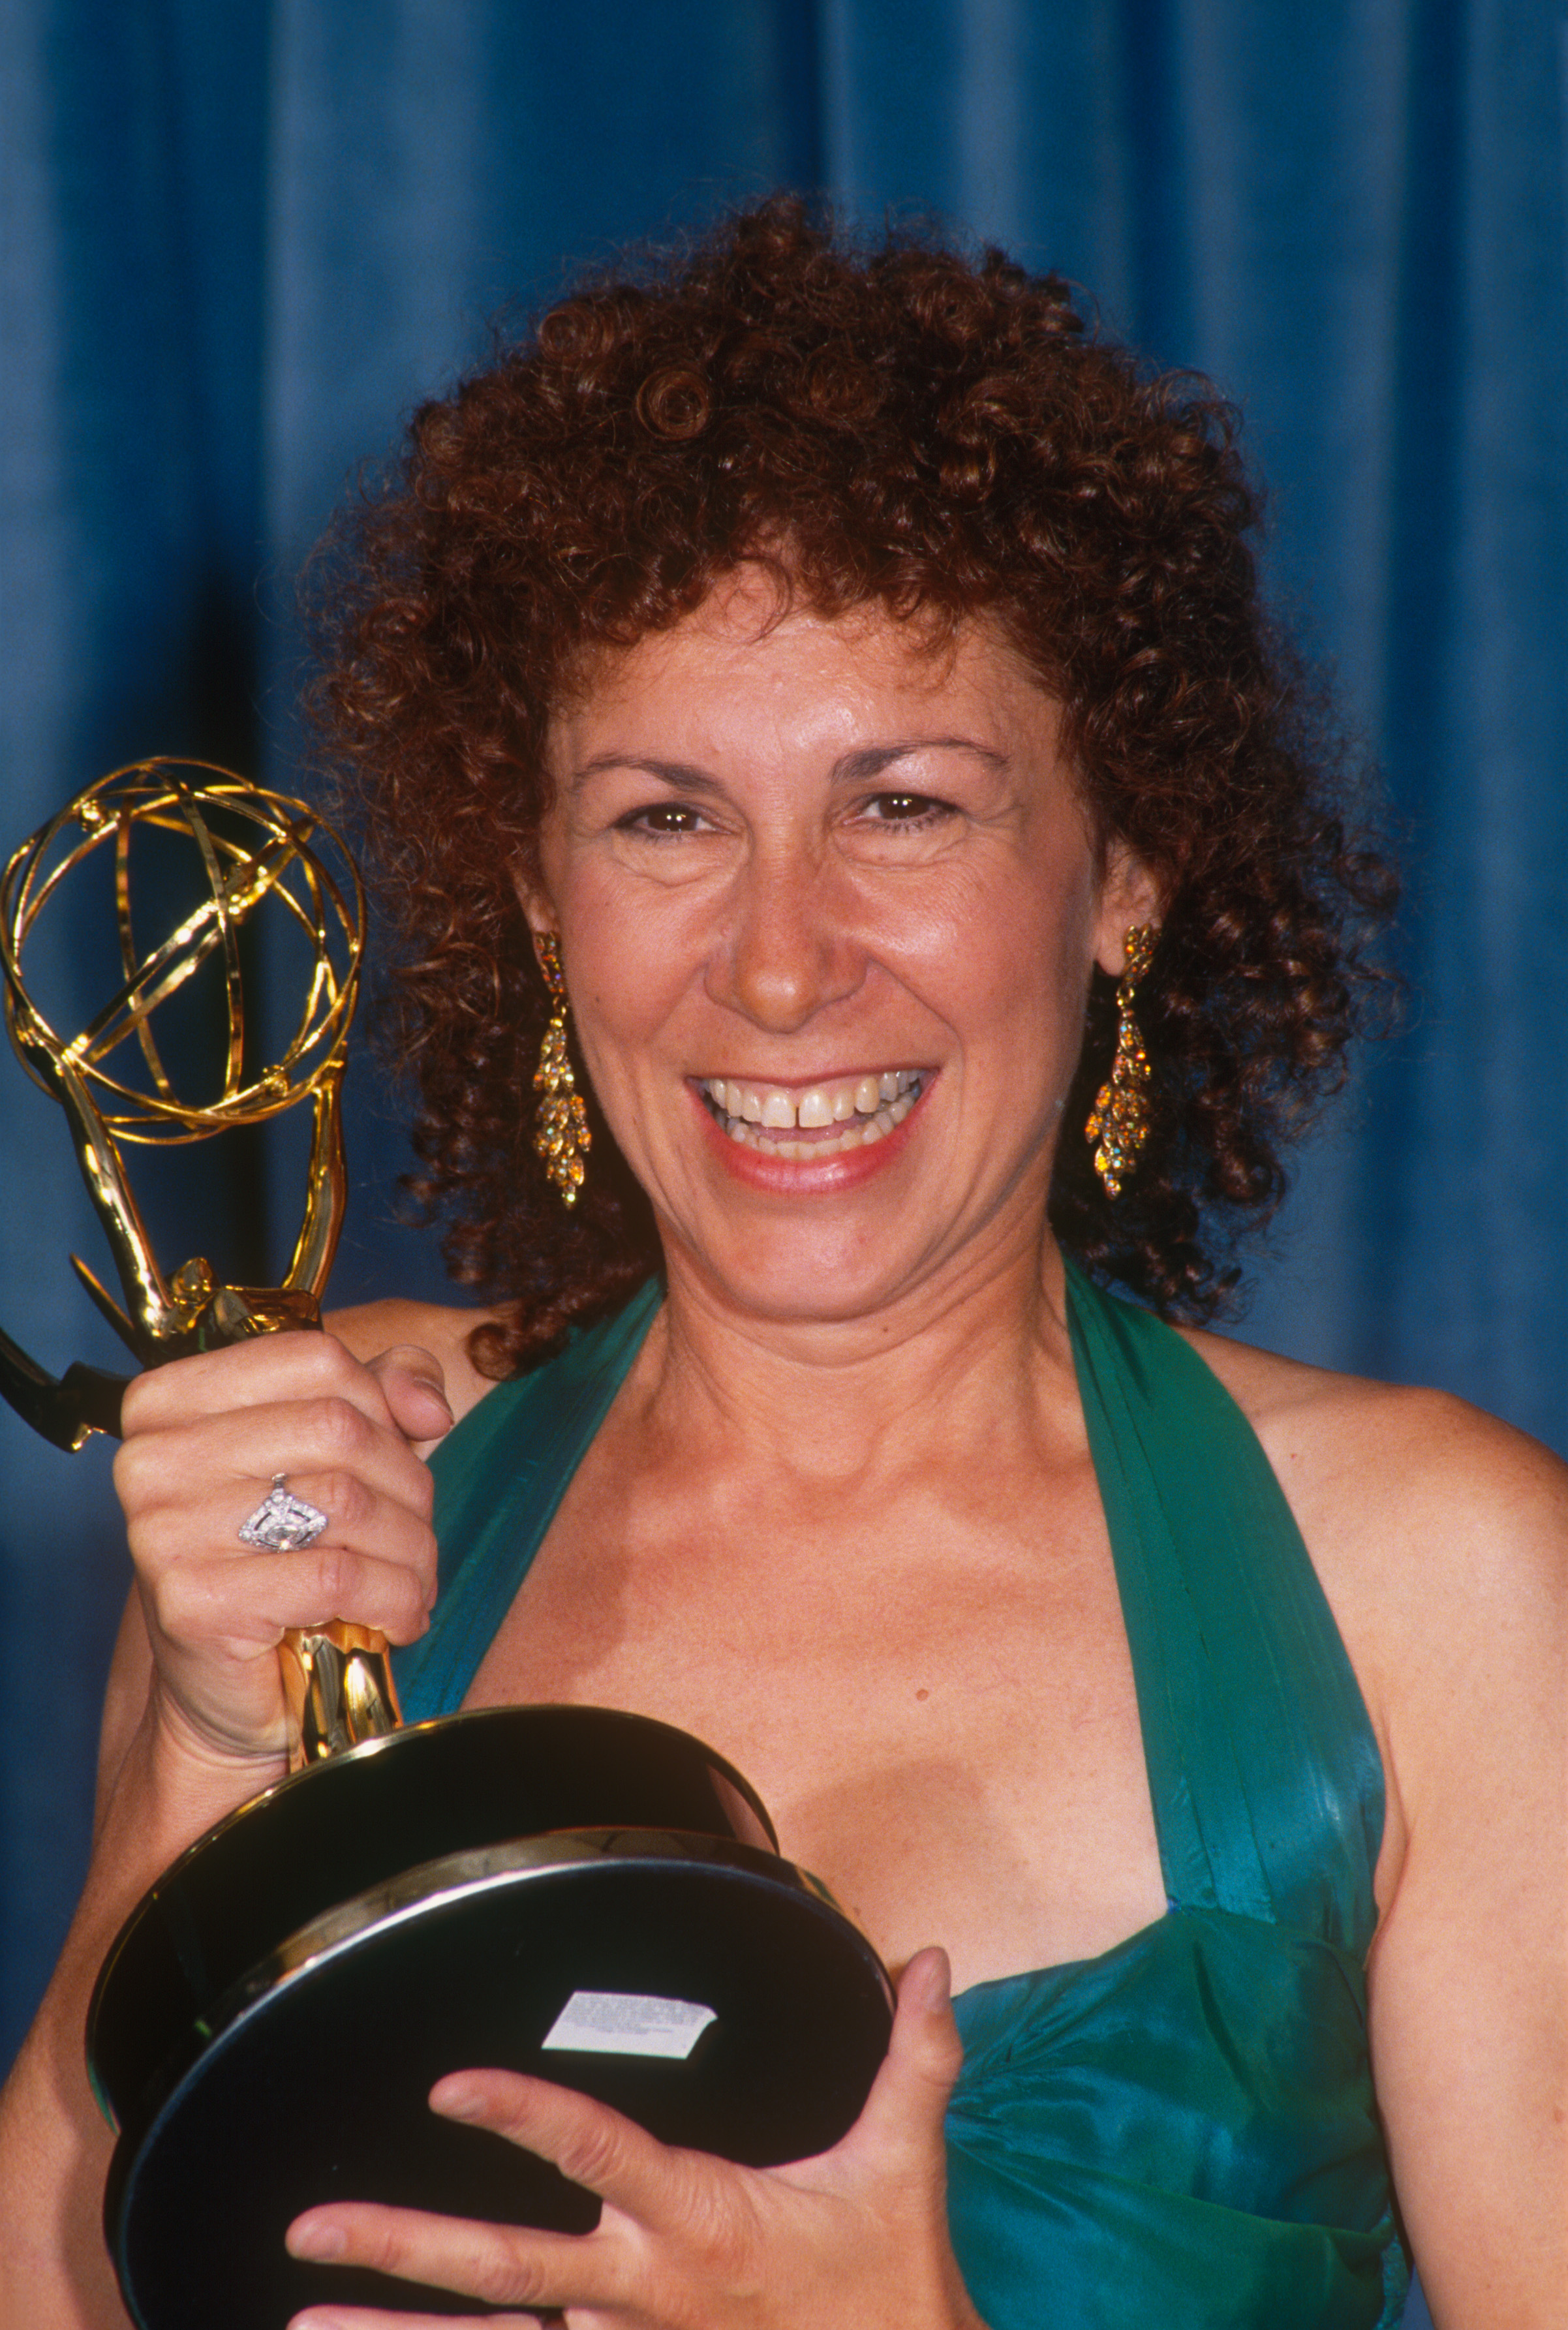 Rhea Perlman wins Emmy for her role in "Cheers" at the 1989 Golden Globe Awards | Source: Getty Images